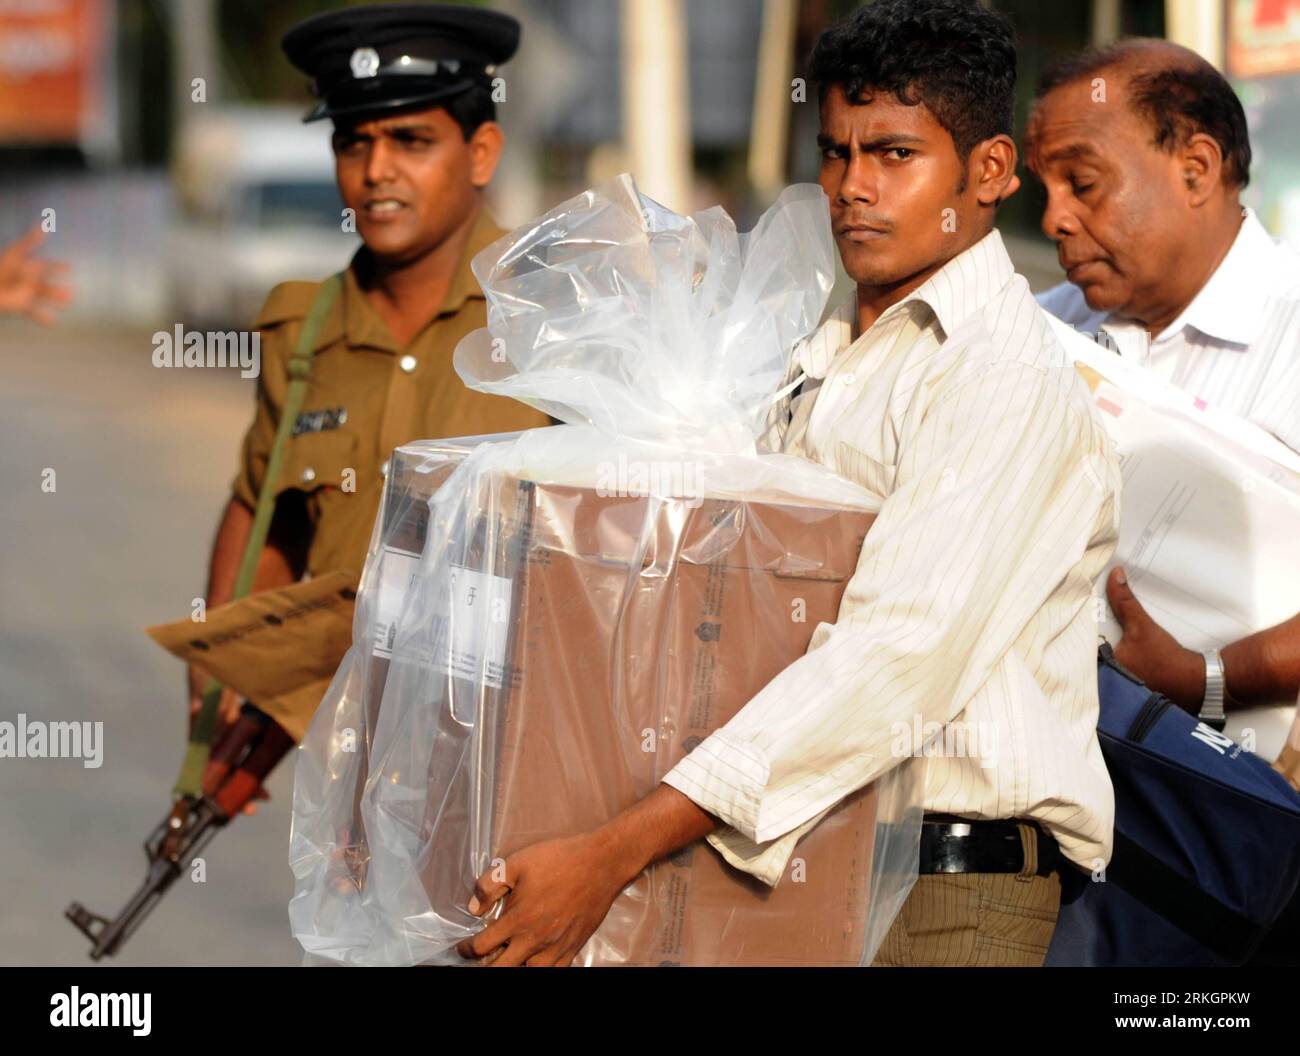 Bildnummer: 55611598  Datum: 23.07.2011  Copyright: imago/Xinhua (110723) -- JAFFNA (SRI LANKA), July 23, 2011 (Xinhua) -- A Sri Lankan election official carries a ballot box to be transferred to a main counting center in Jaffna on July 23, 2011. Saturday s polls for 65 administrative bodies, including 20 in the districts of Jaffna, Kilinochchi and Mullaittivu where fighting raged till early 2009, ended peacefully despite of fears that violence may break out. (Xinhua/Gayan Sameera)(zx) SRI LANKA-WAR ZONE-POLLING PUBLICATIONxNOTxINxCHN Gesellschaft Politik Wahl Kommunalwahl Auszählung Wahlurne Stock Photo